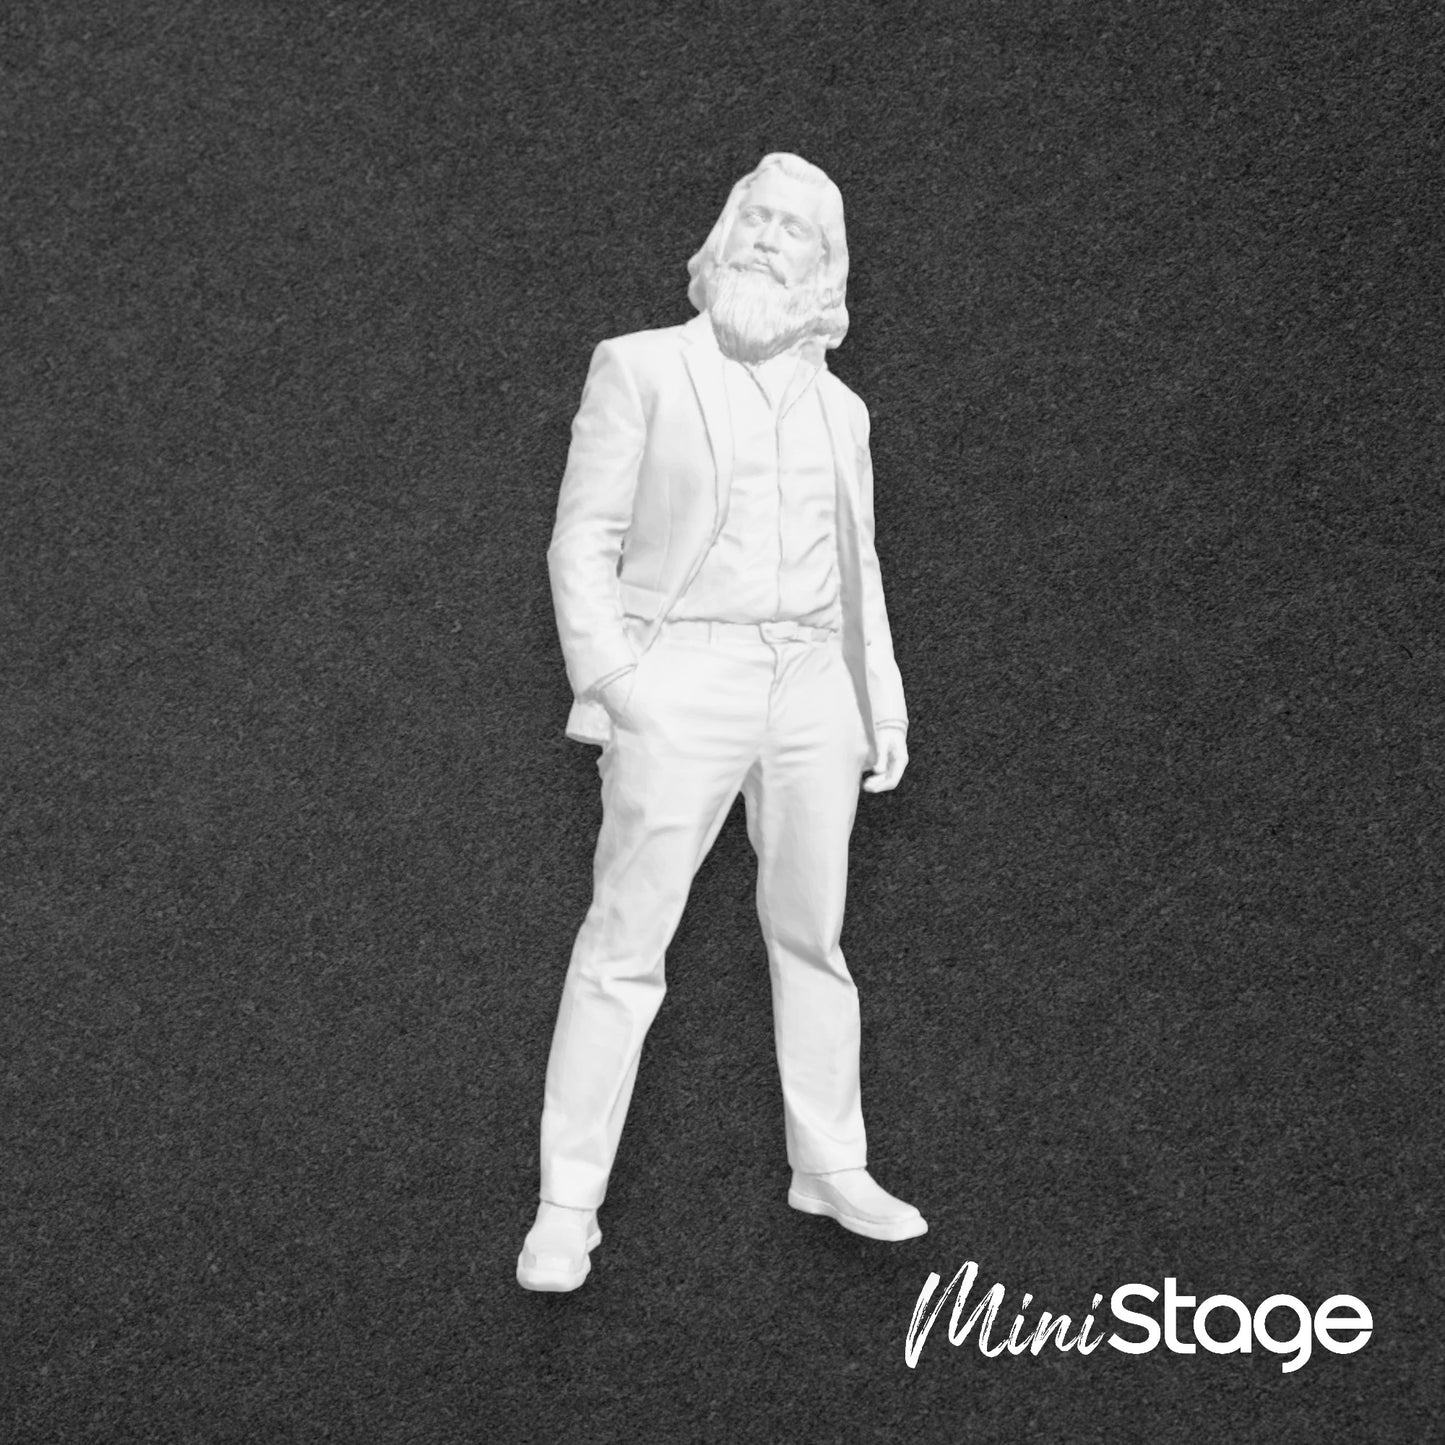 Nick - Figure of a male Standing Male with a Large Beard wearing Smart Clothing